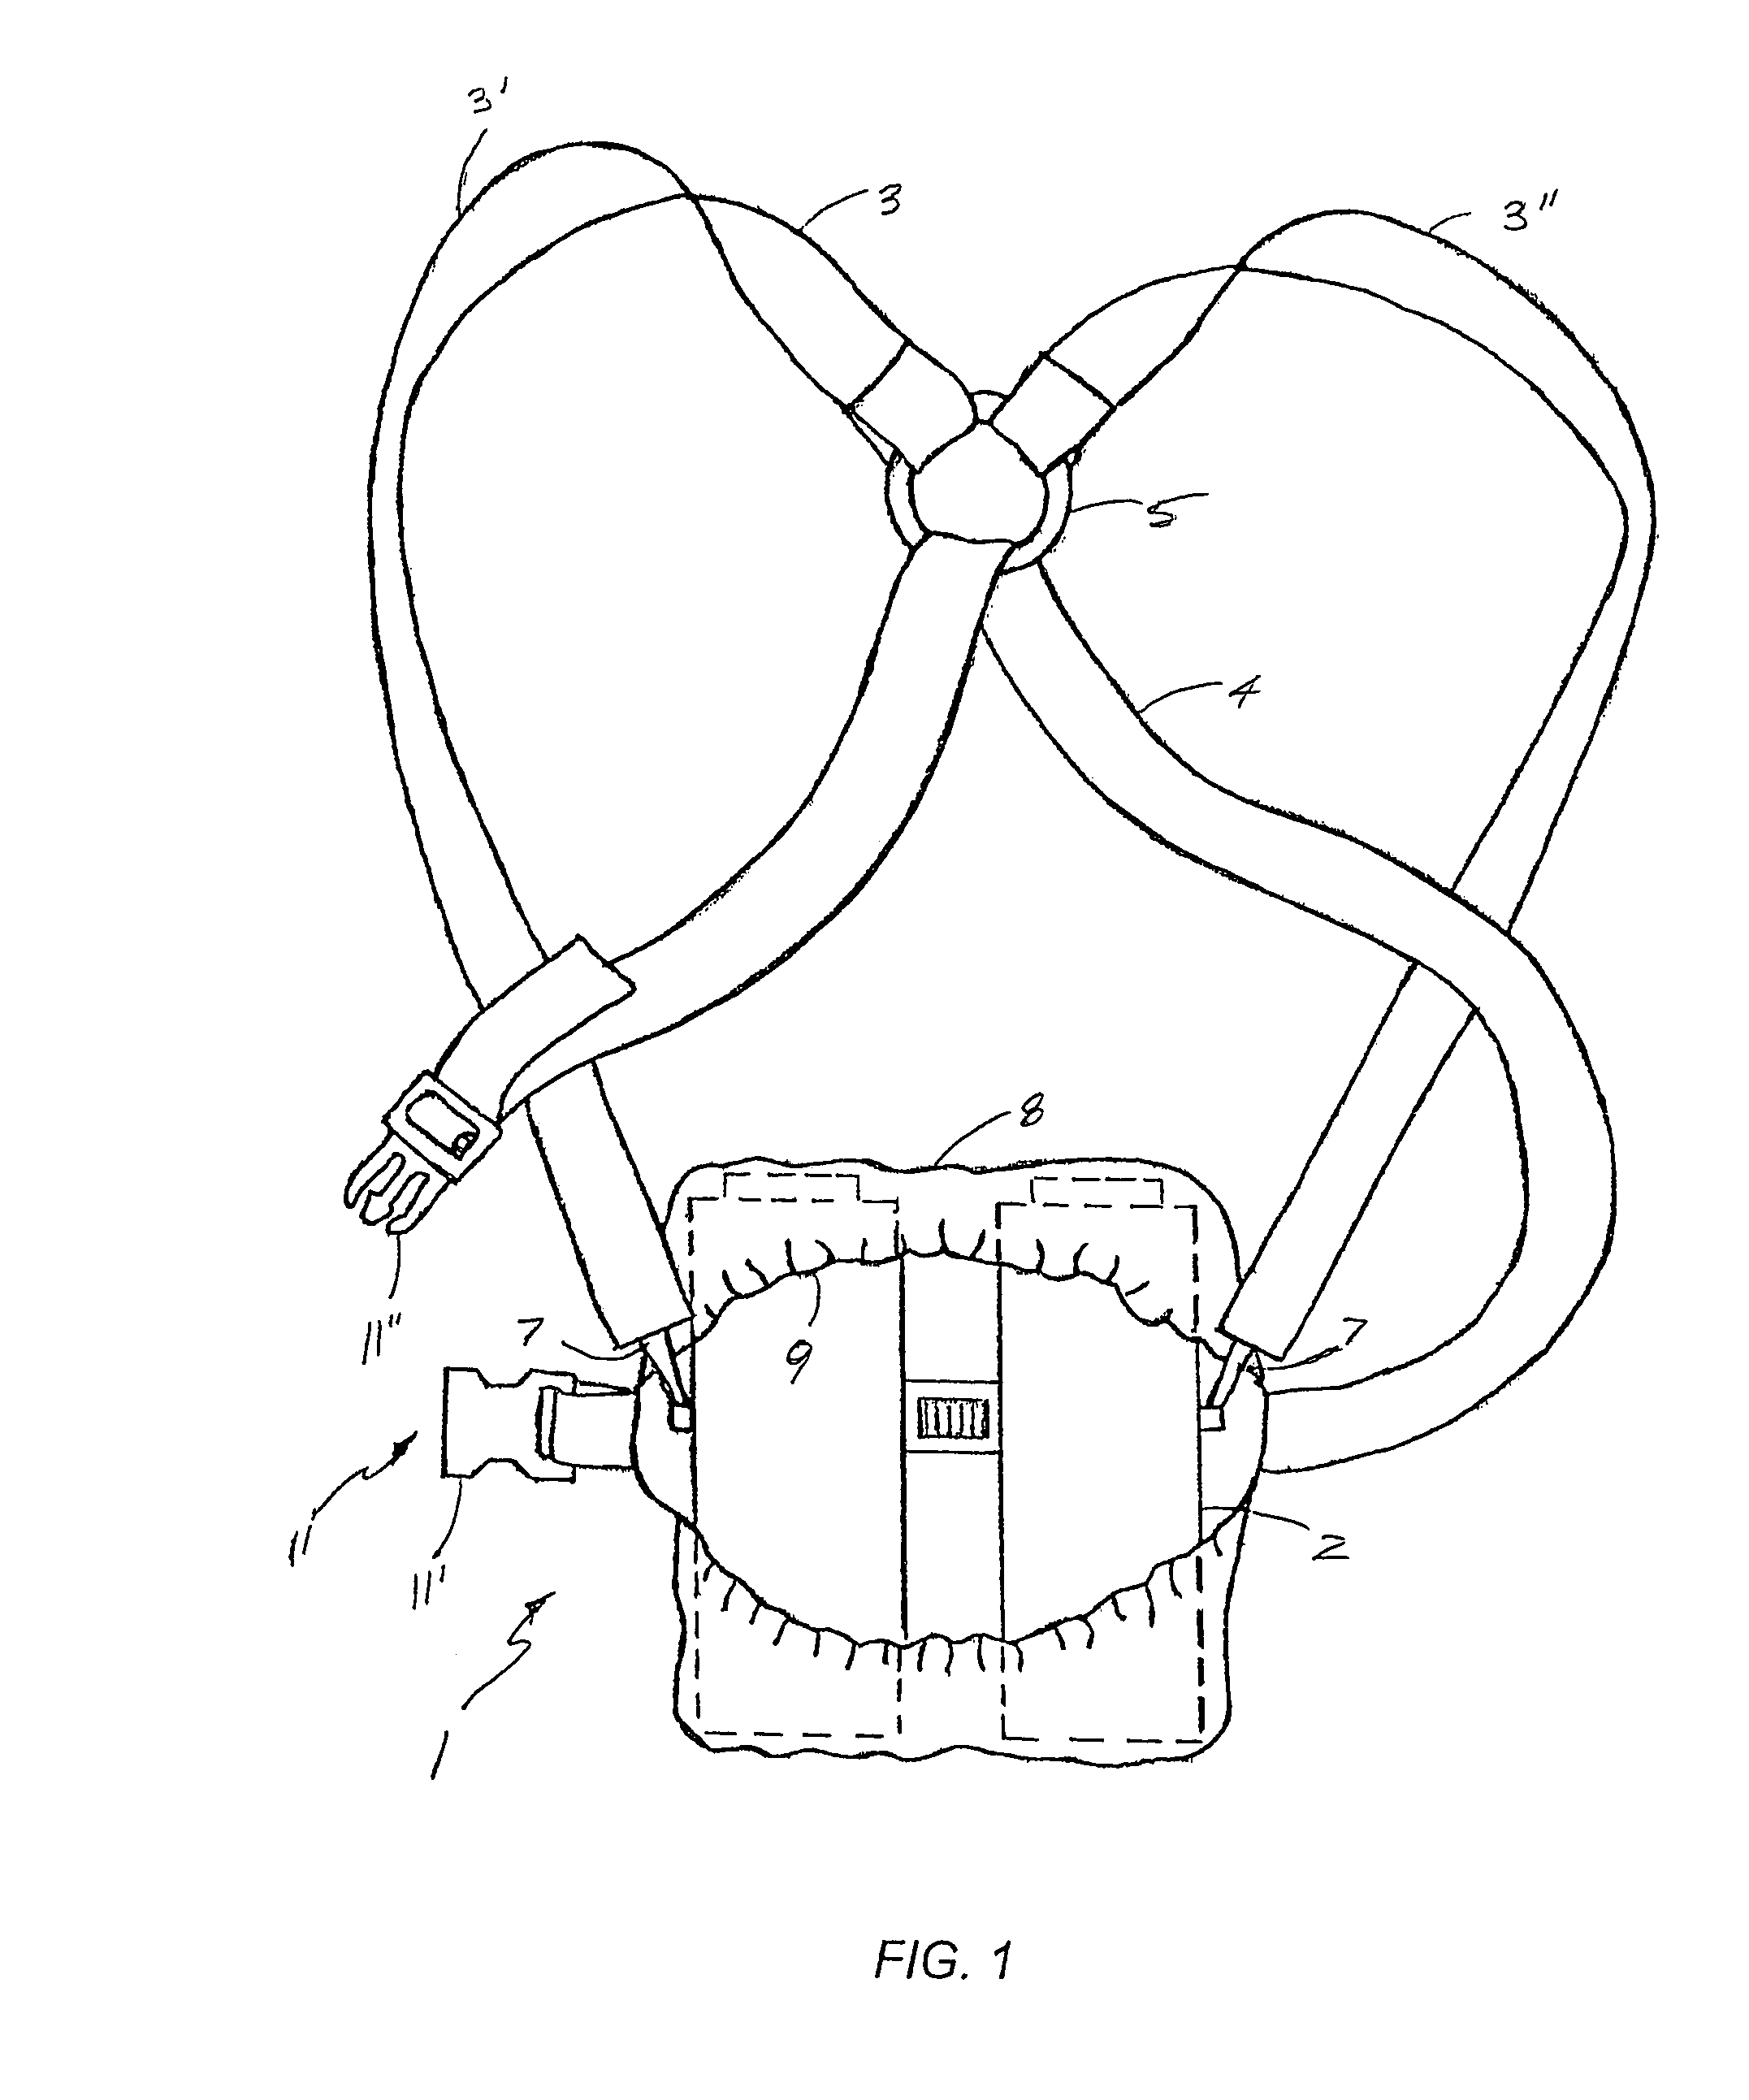 Device for restraining and protecting neckstrap-supported user equipment